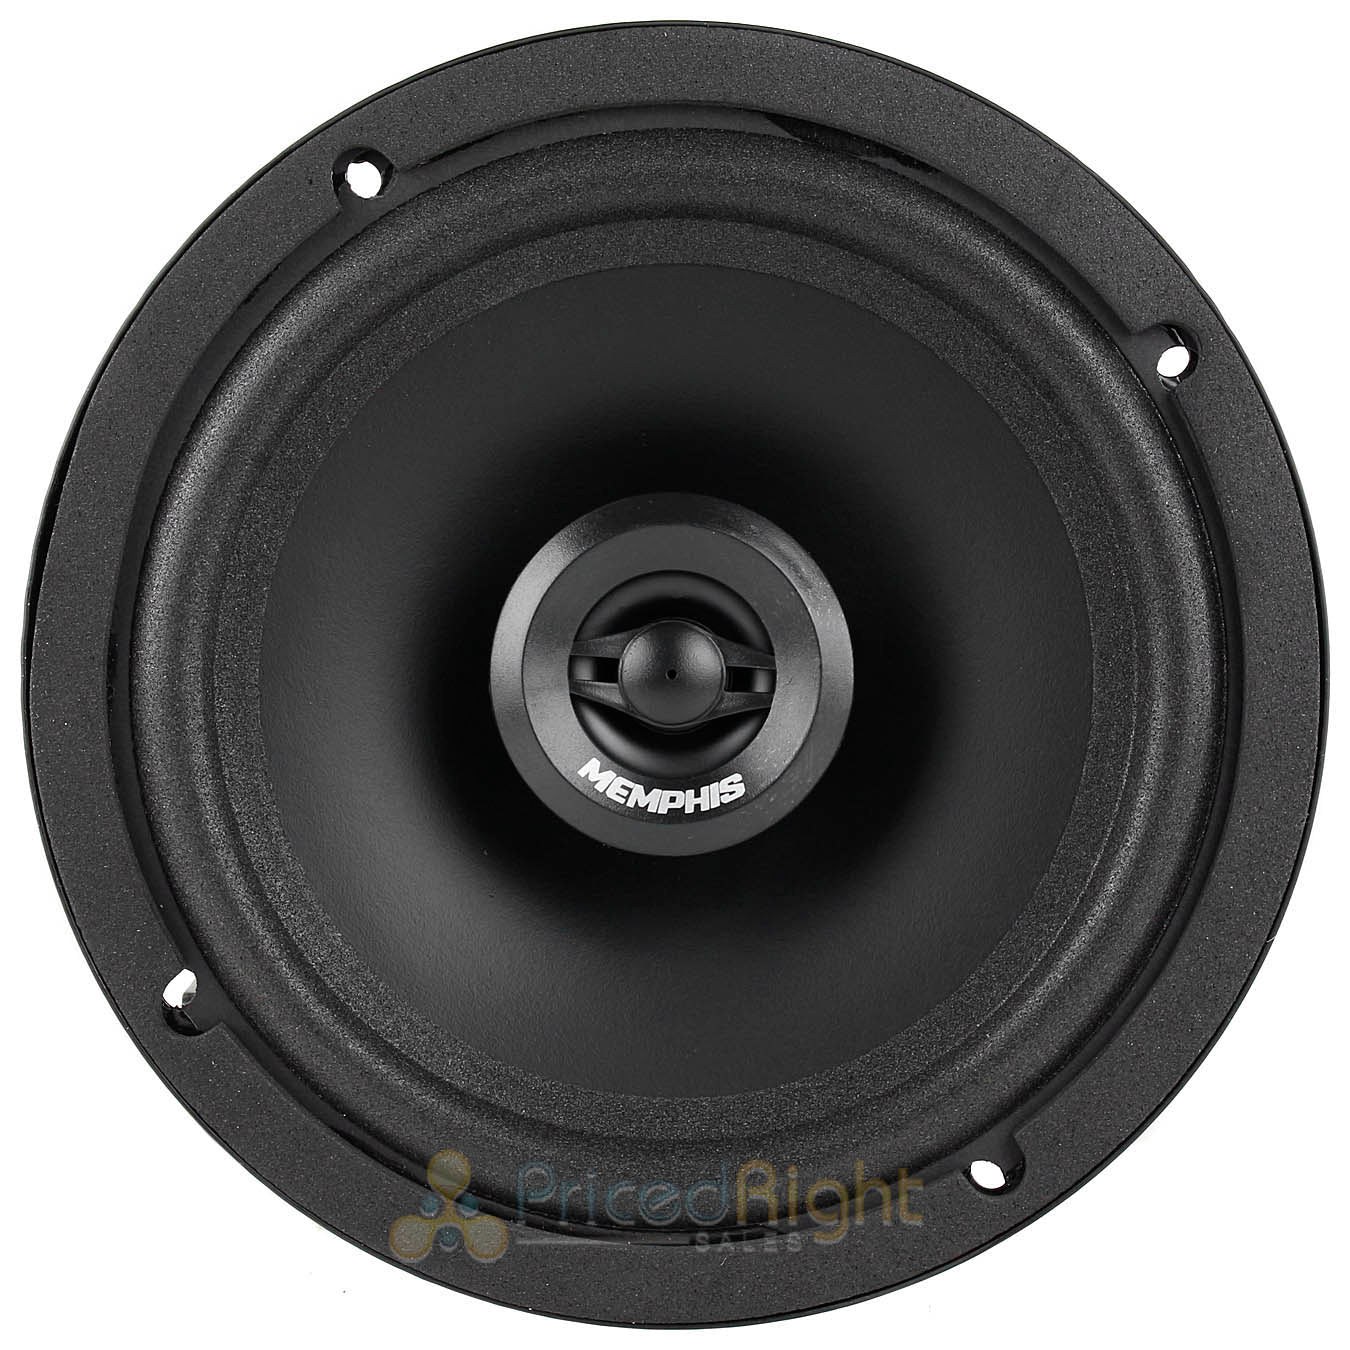 4 Memphis Audio 6.5" 2 Way Coaxial Speakers 60 Watts Max Street Reference SRX62